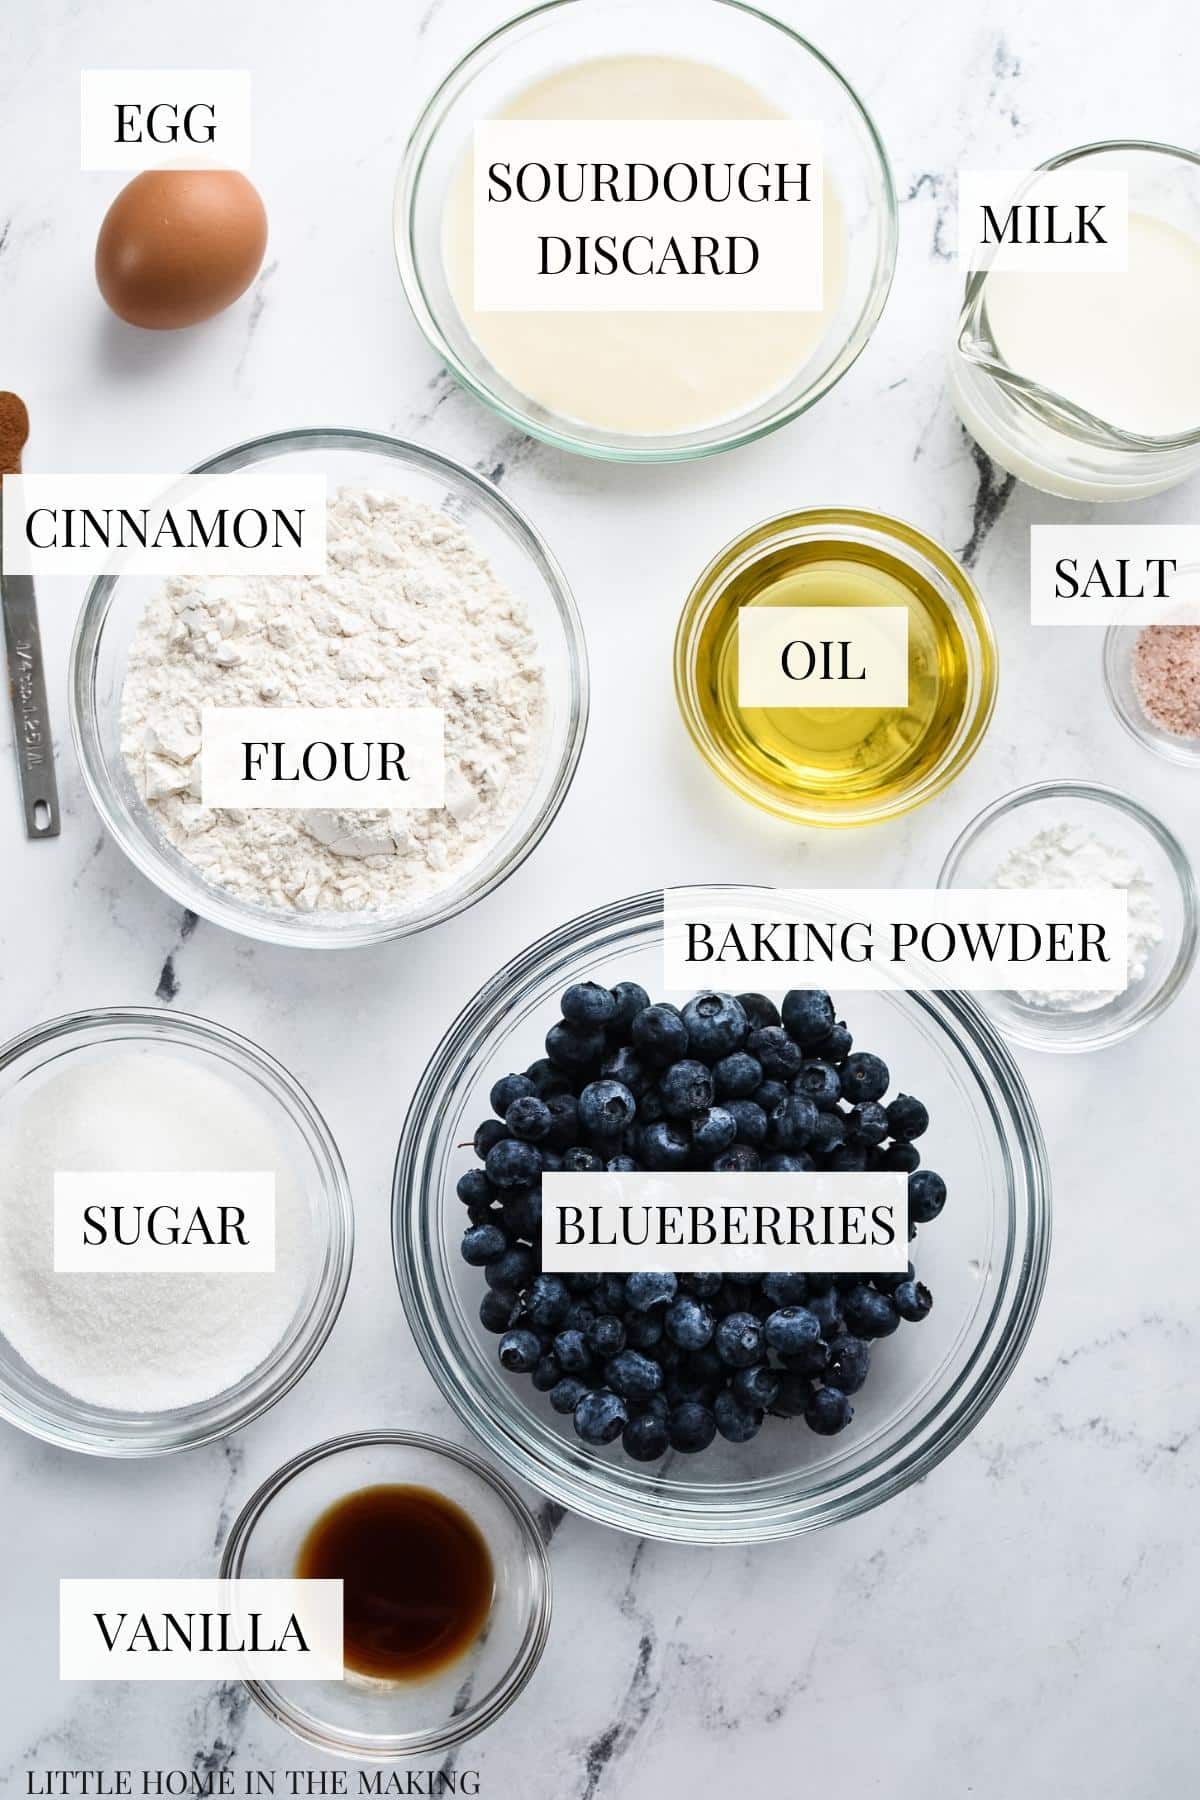 The ingredients needed to make sourdough blueberry bread, including blueberries, flour, and oil.